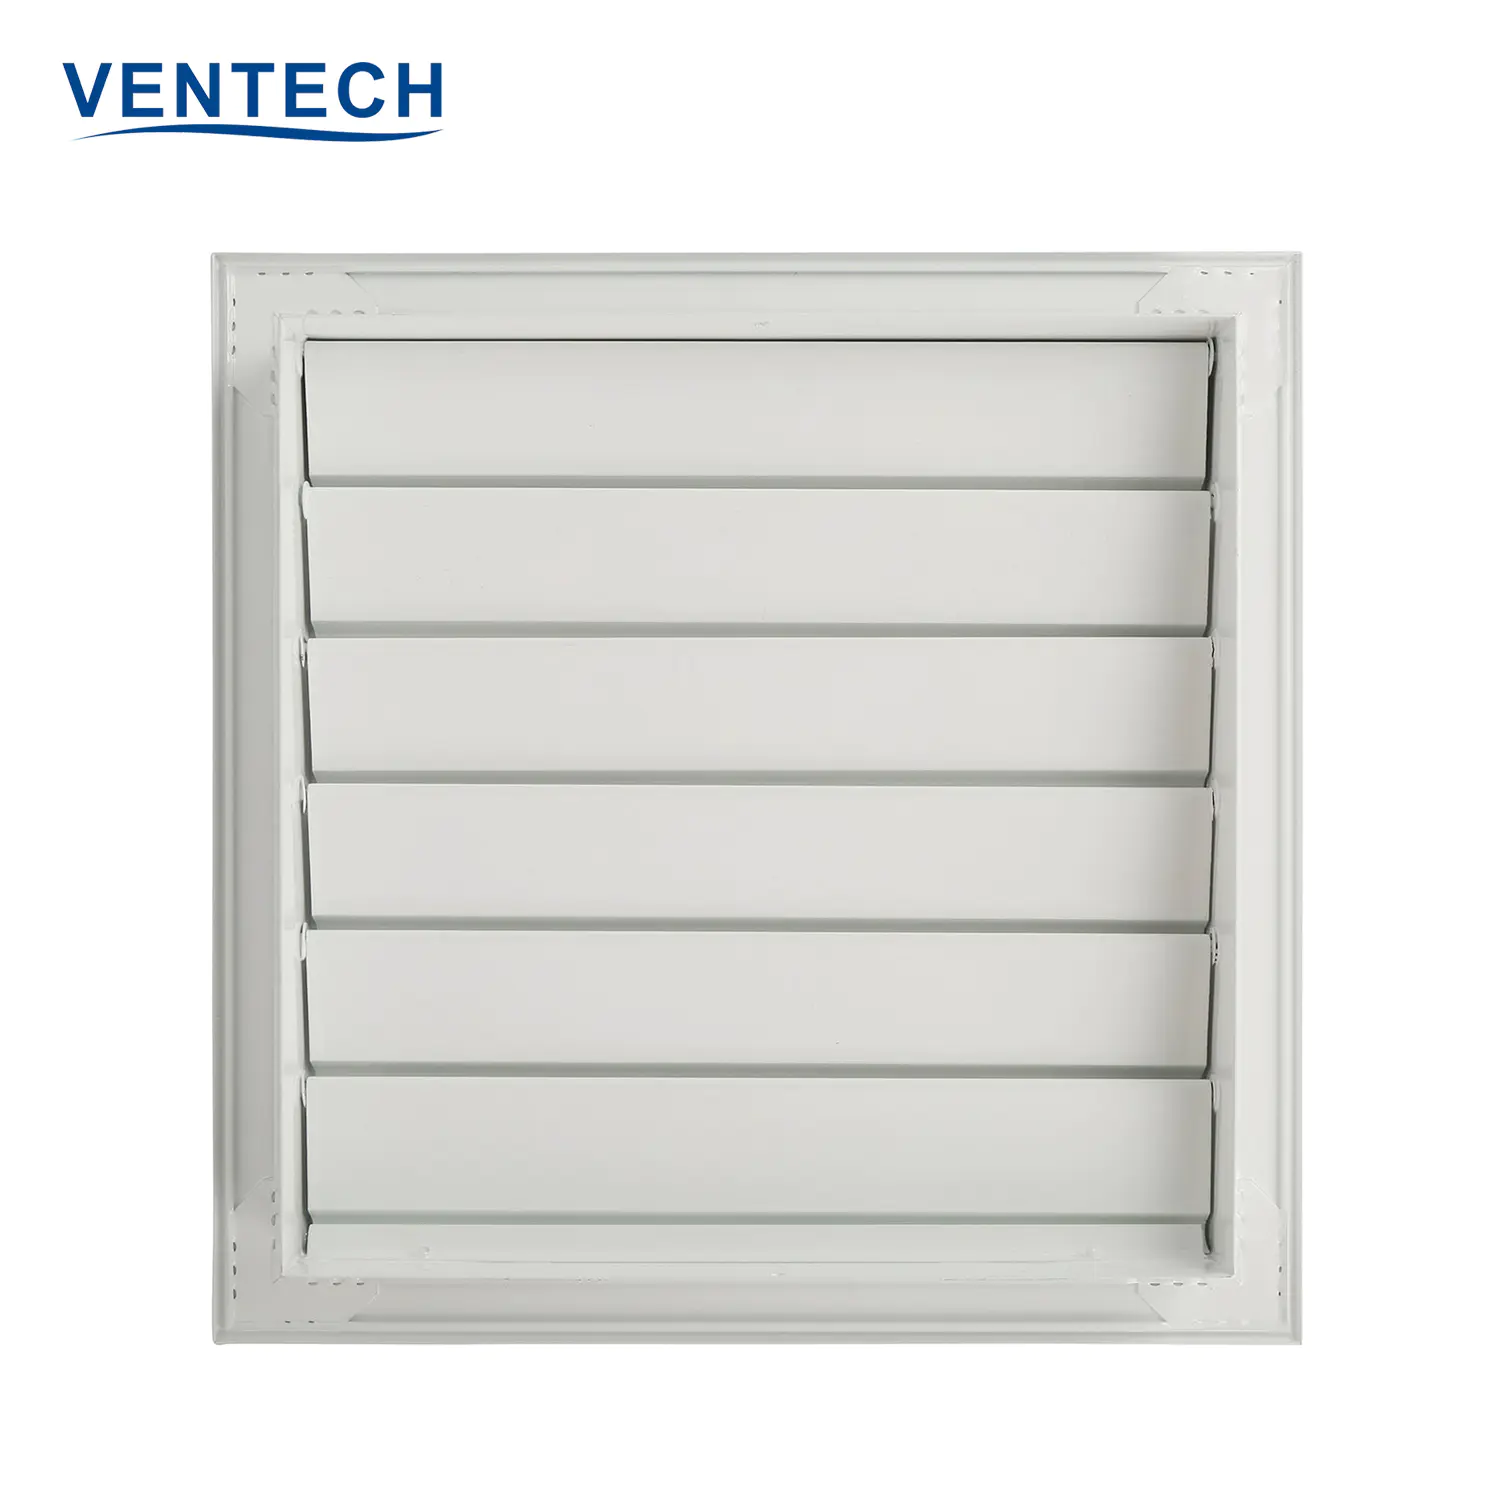 Hvac Exhaust Fresh Air Louvers Air Conditioner Adjustable Aluminum Gravity Air Grill Vent Cover Louvers for Ventilation